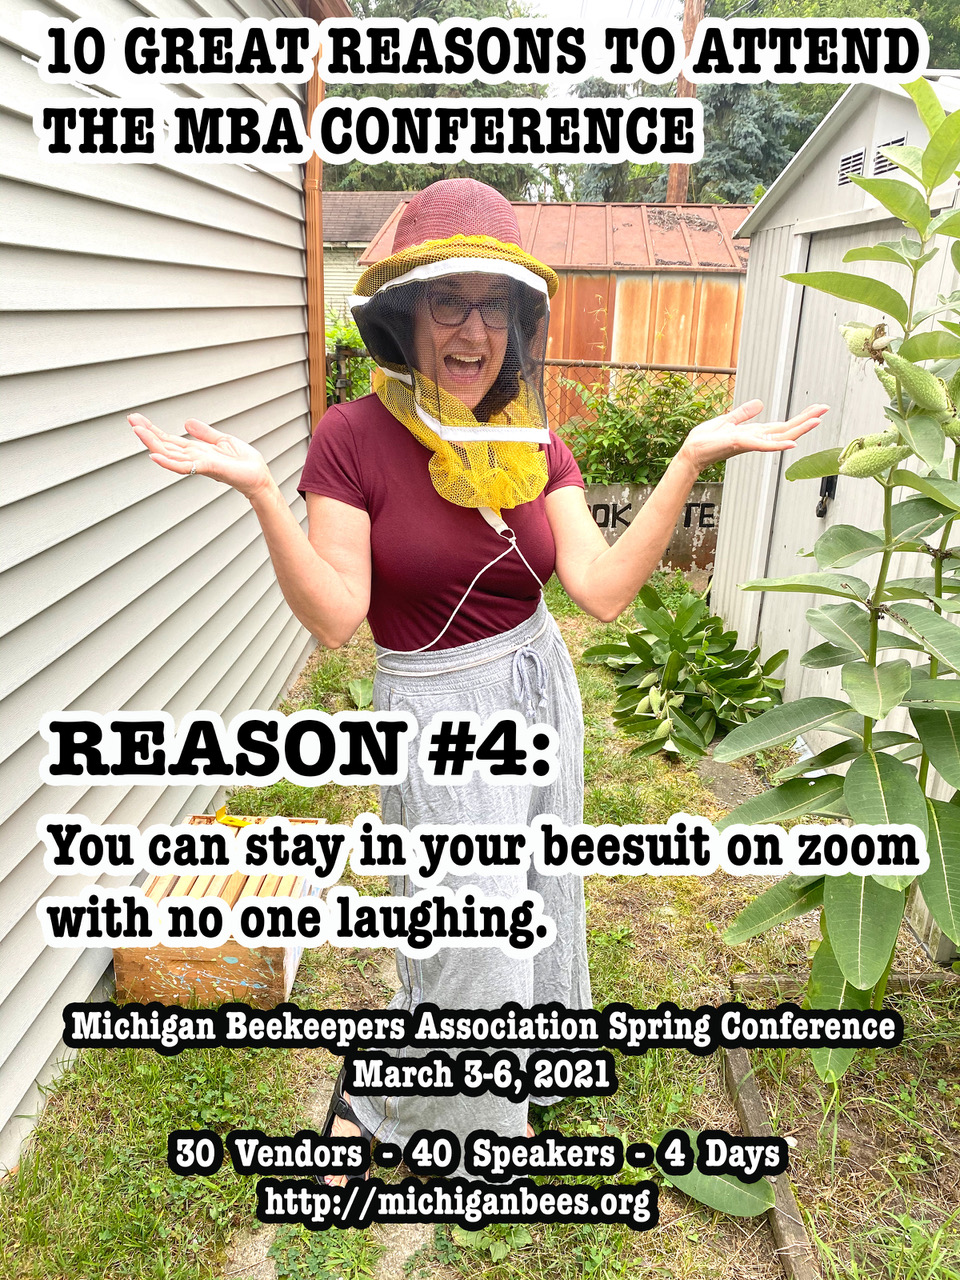 CATCH THE BUZZ – Michigan Beekeepers Association Spring Conference